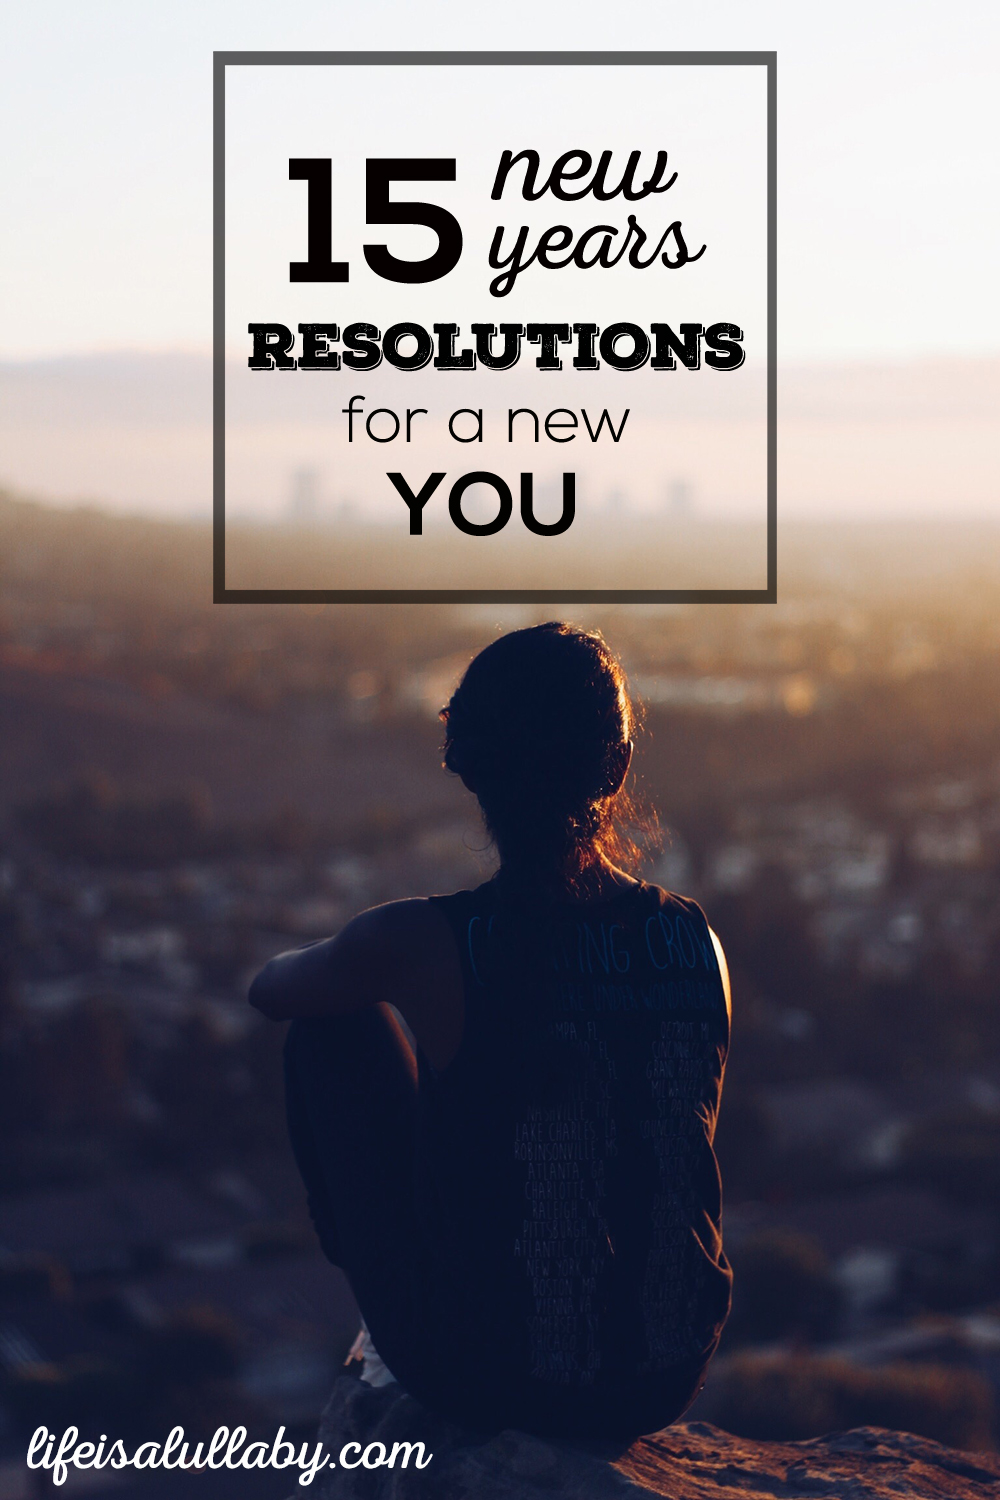 15 New Years Resolutions for a New You